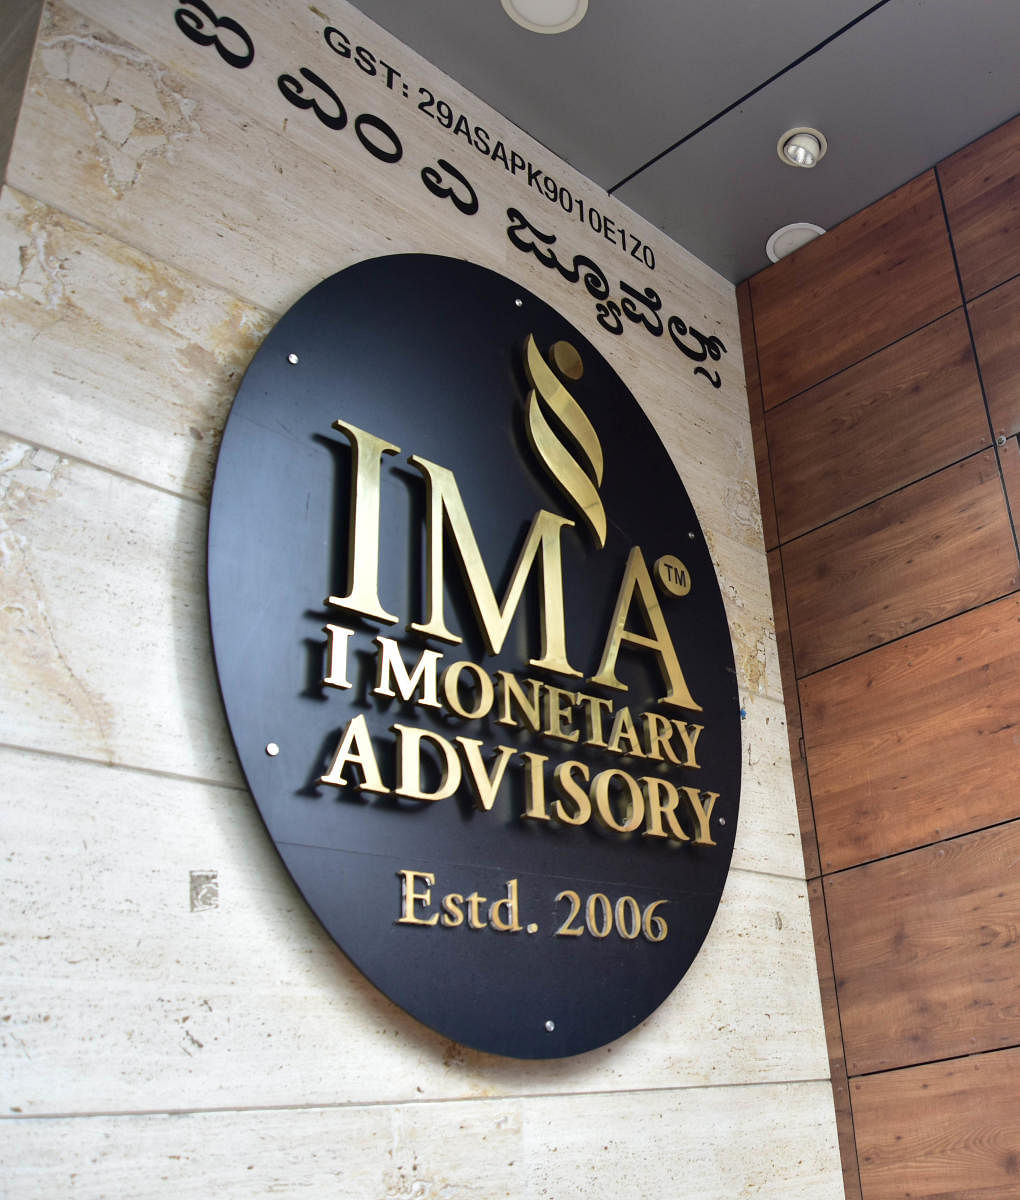 The police have so far received complaints from over 26,000 investors in the IMA scam.